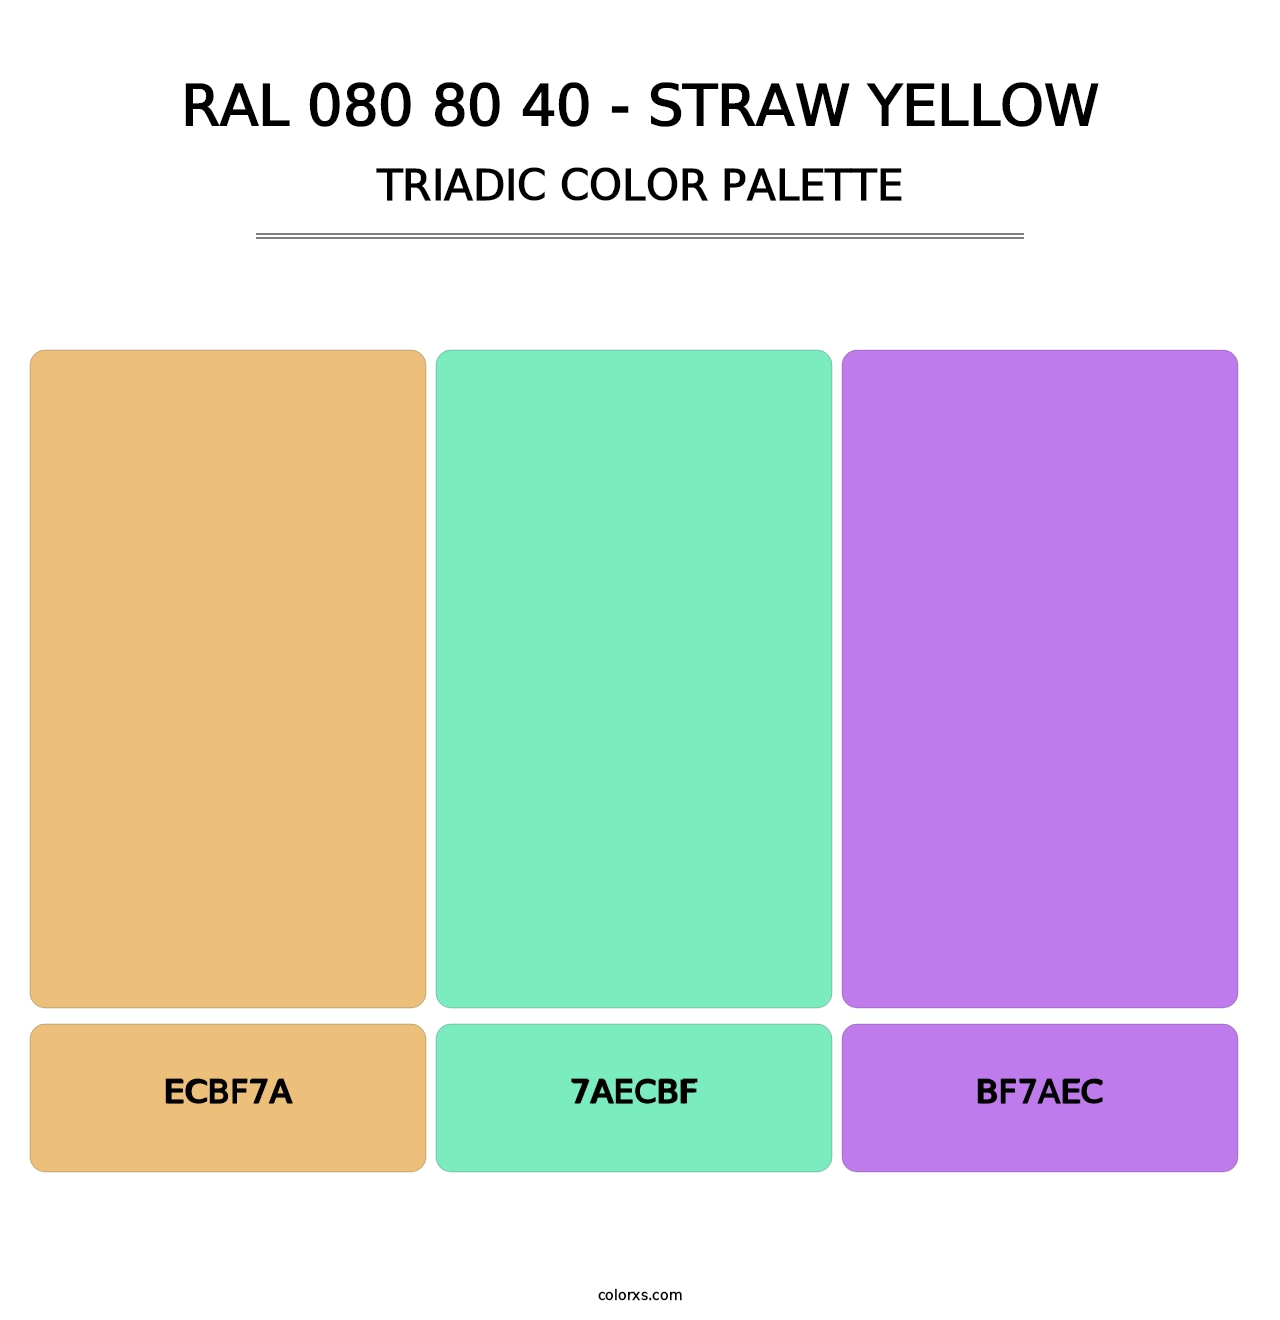 RAL 080 80 40 - Straw Yellow - Triadic Color Palette